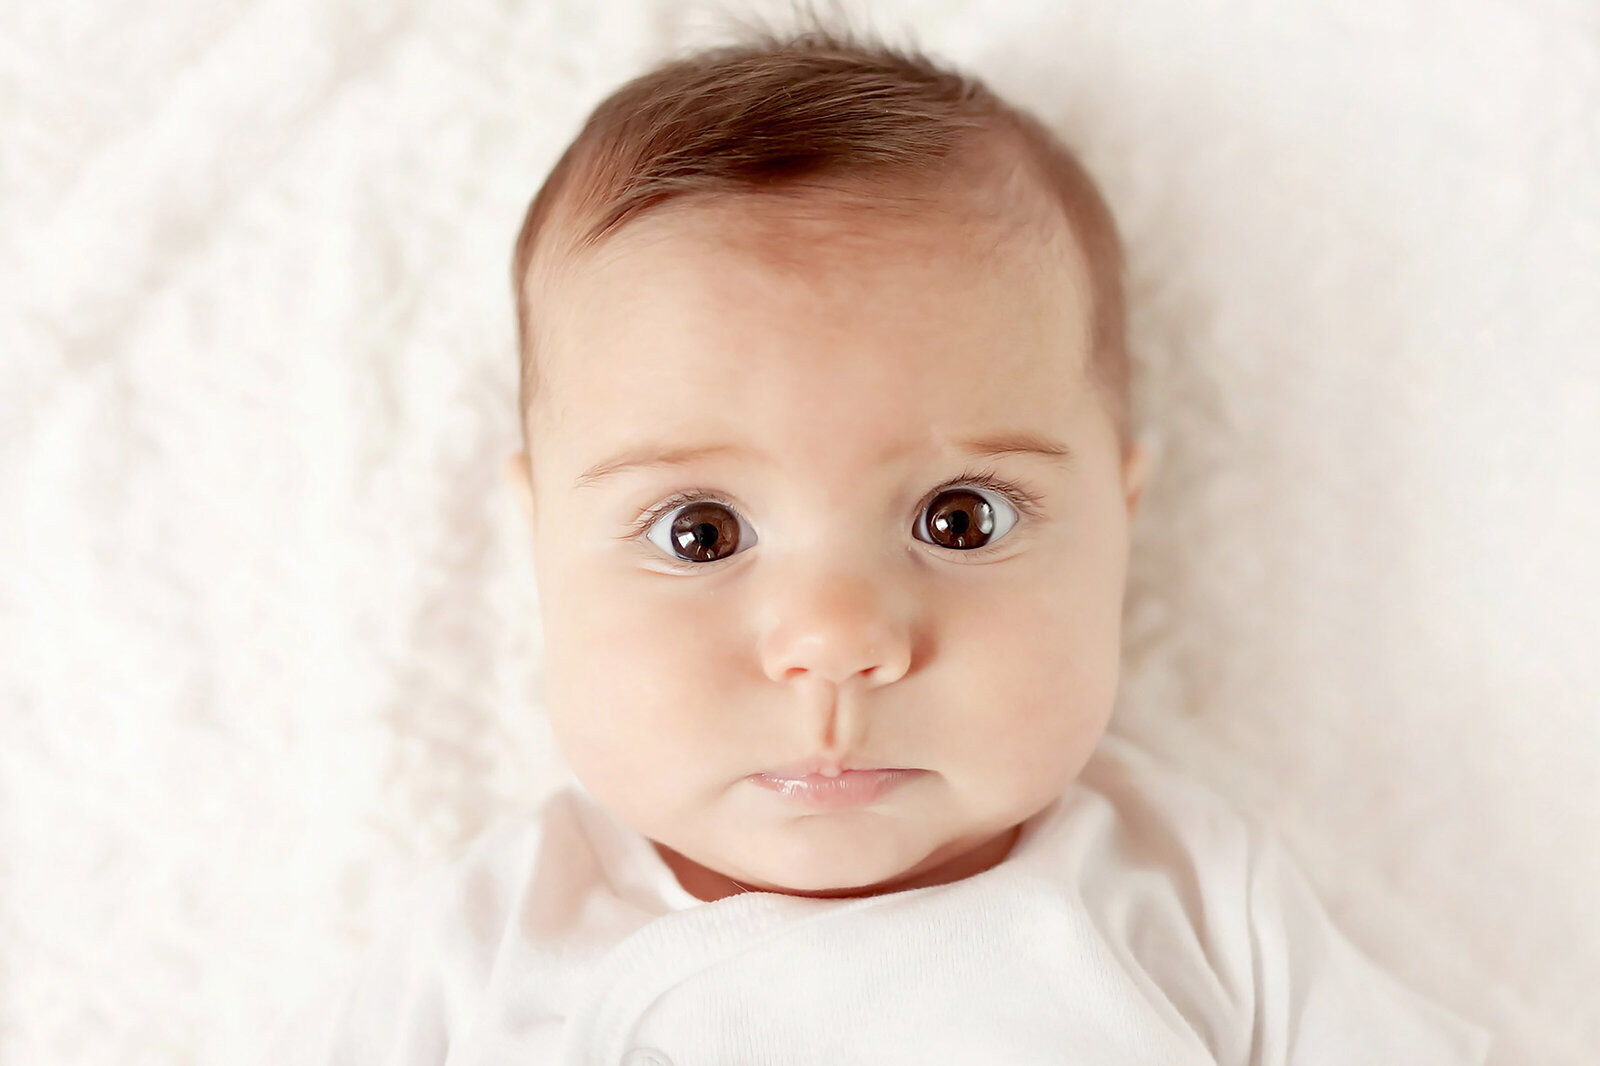 Adorable close-up of a baby with huge brown eyes looking directly into the camera.